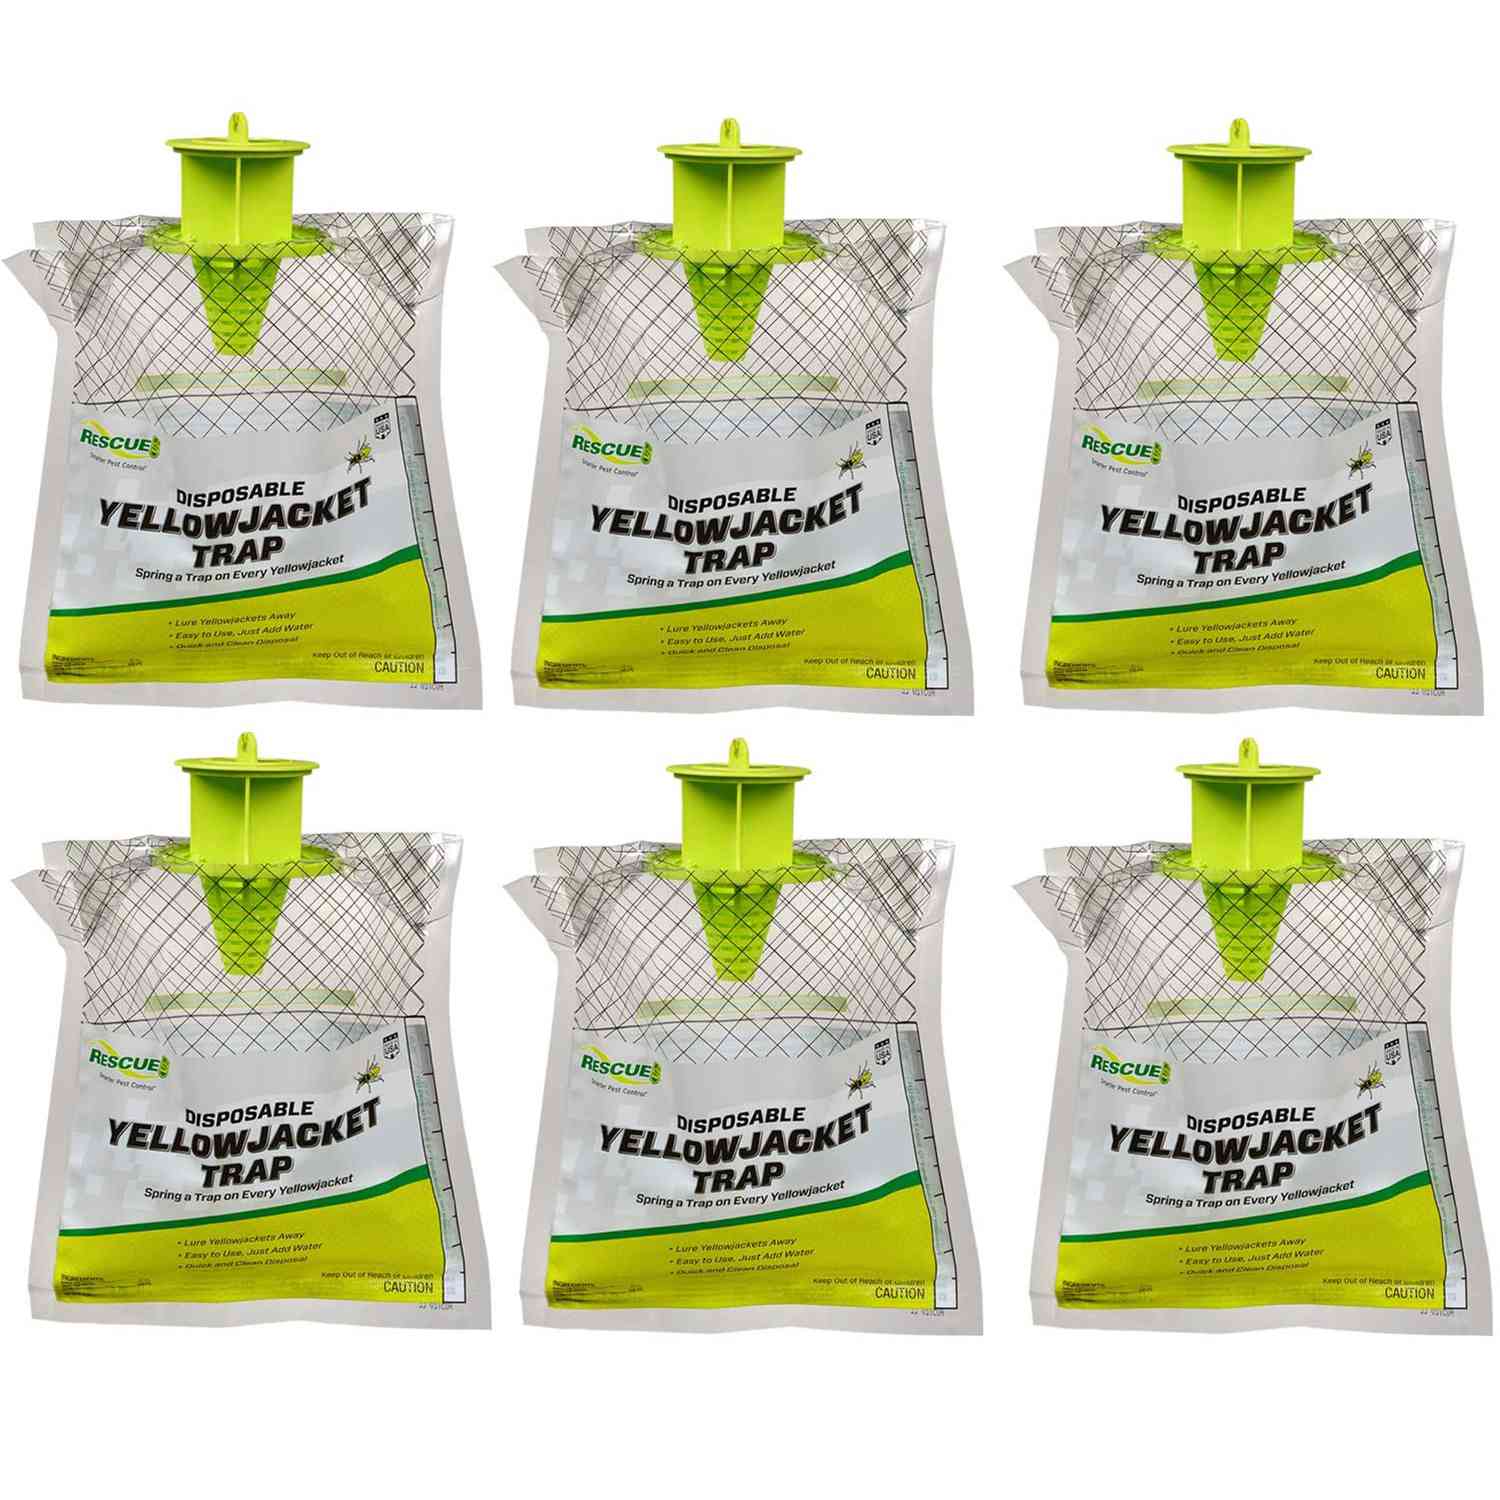 Rescue Disposable Summer Yellow Jacket Traps